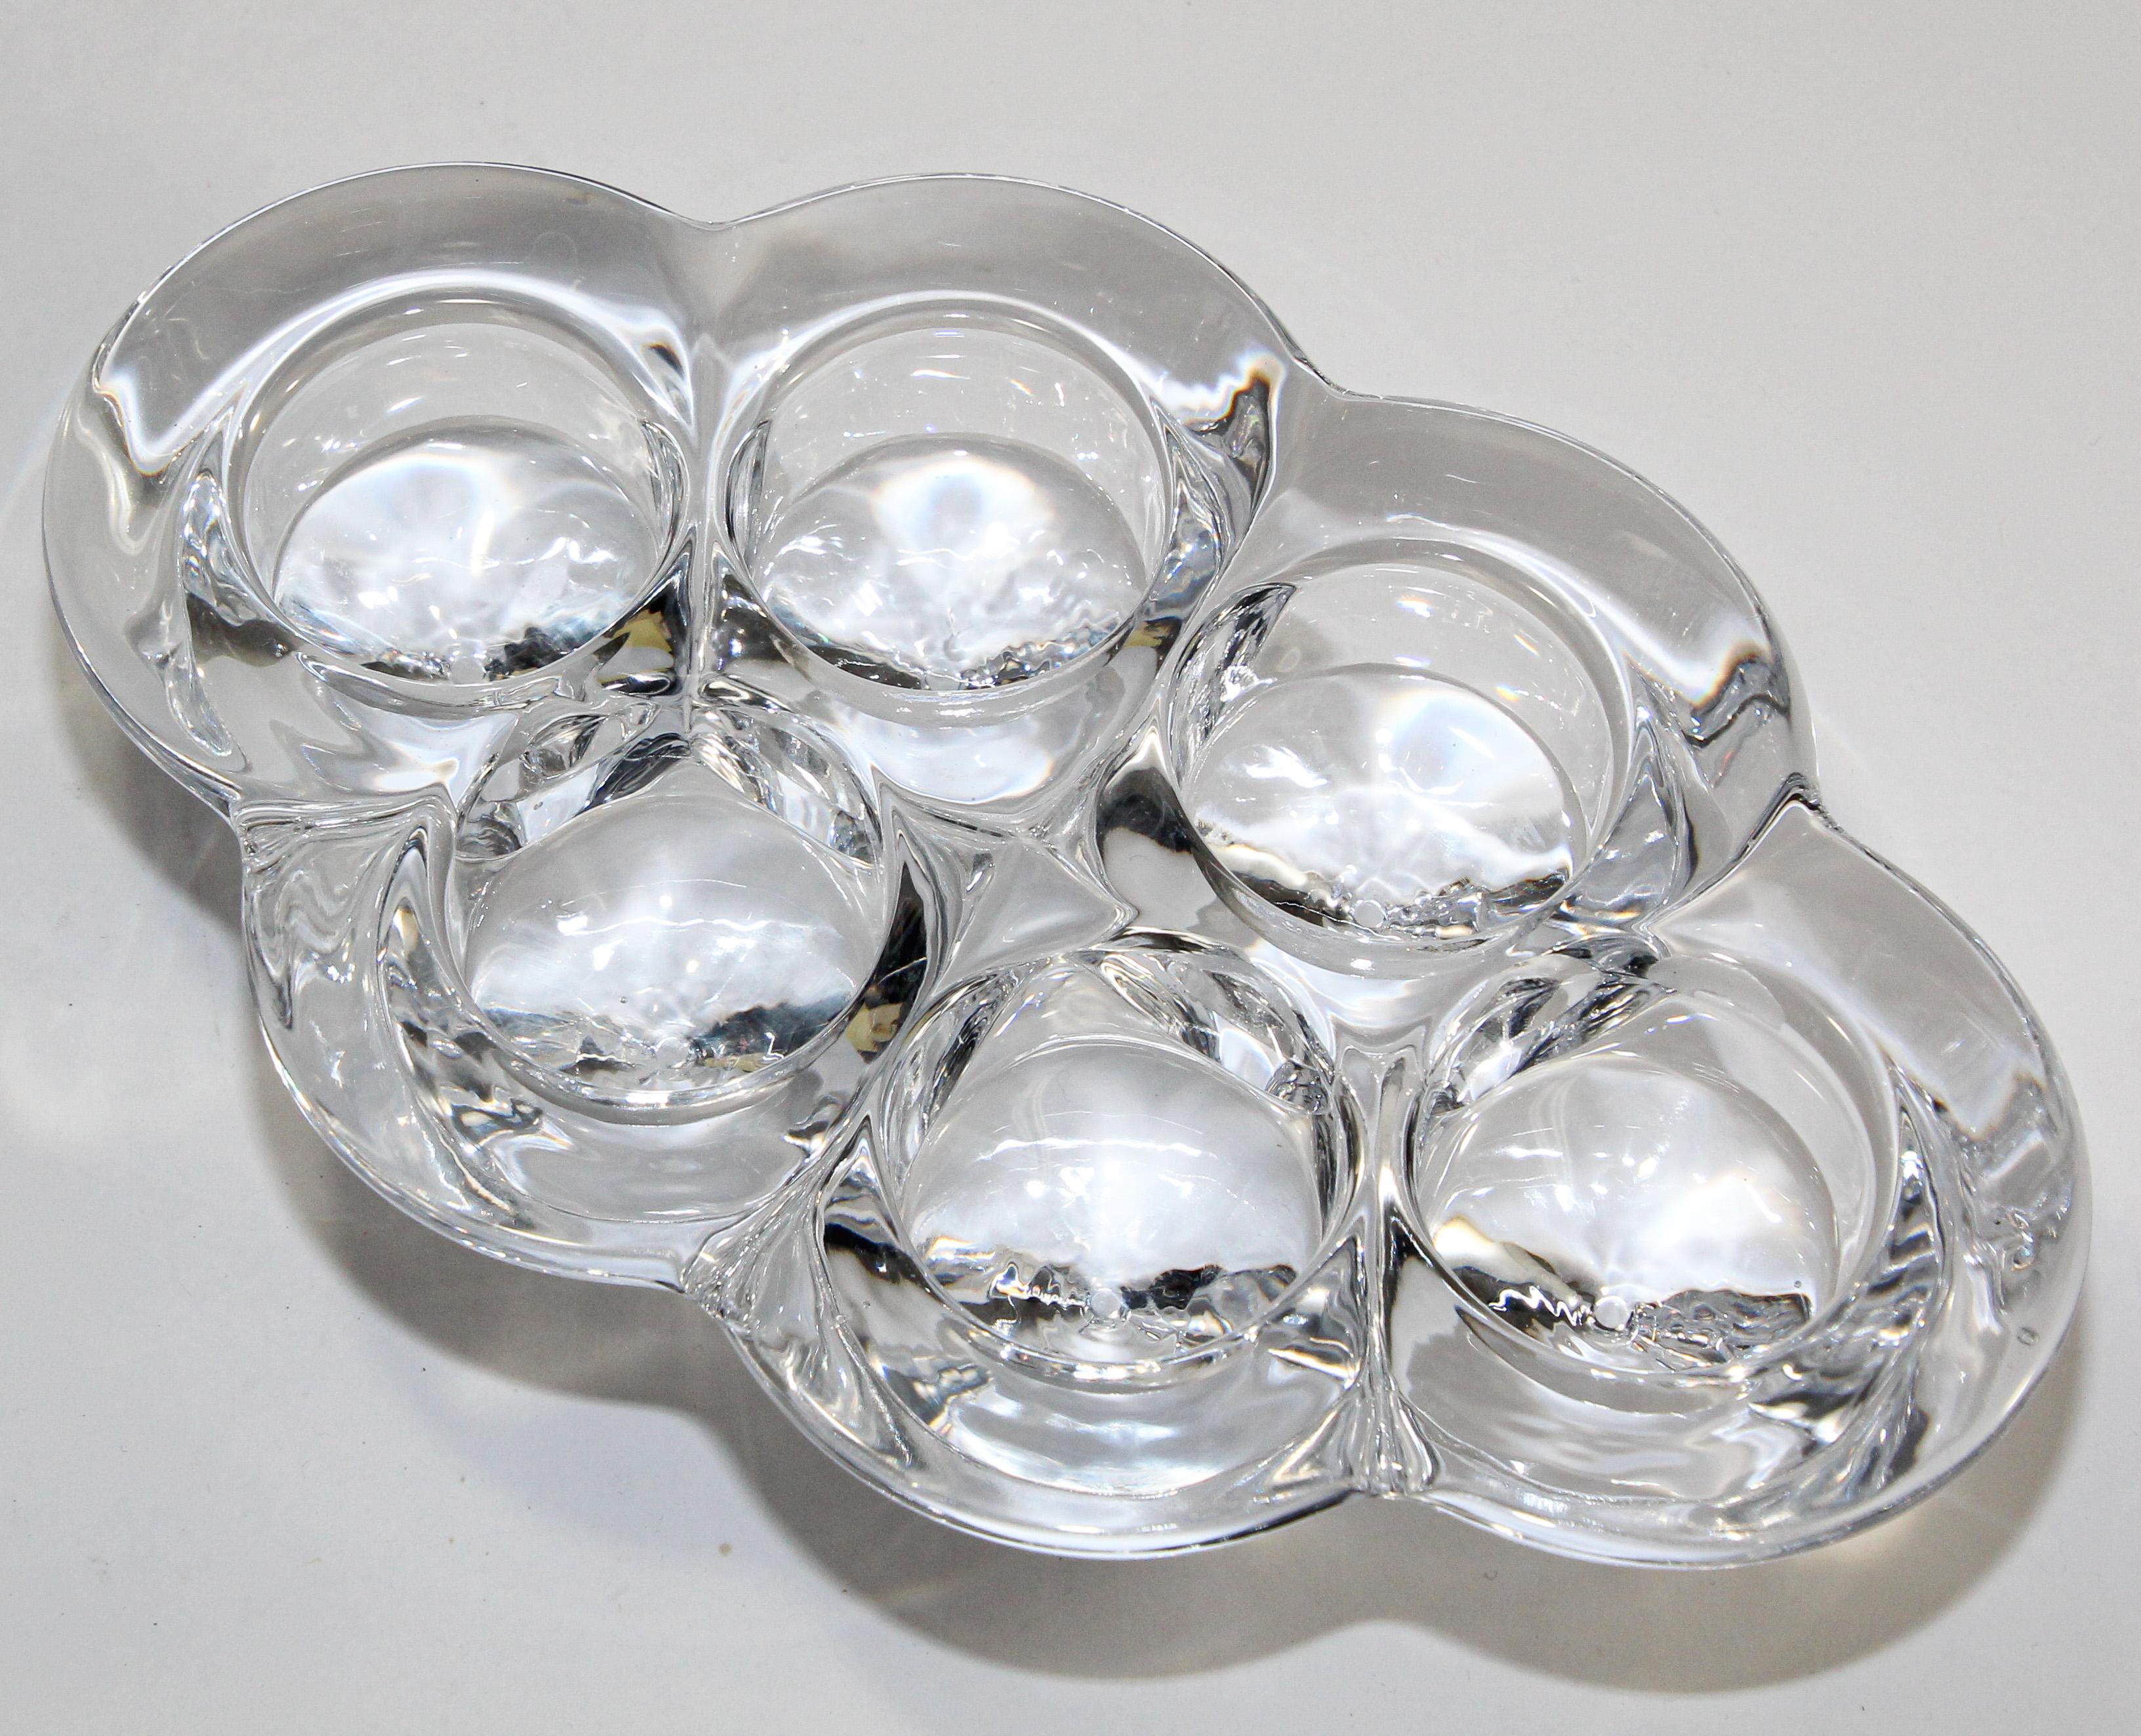 Villeroy and Boch Made in Germany Crystal Votive candle holders.
A very beautiful contemporary clear crystal votive candle holders by Villeroy & Boch,
Candle holder for 6 votives By Villeroy & Boch.
Gorgeous crystal glass modern diamond